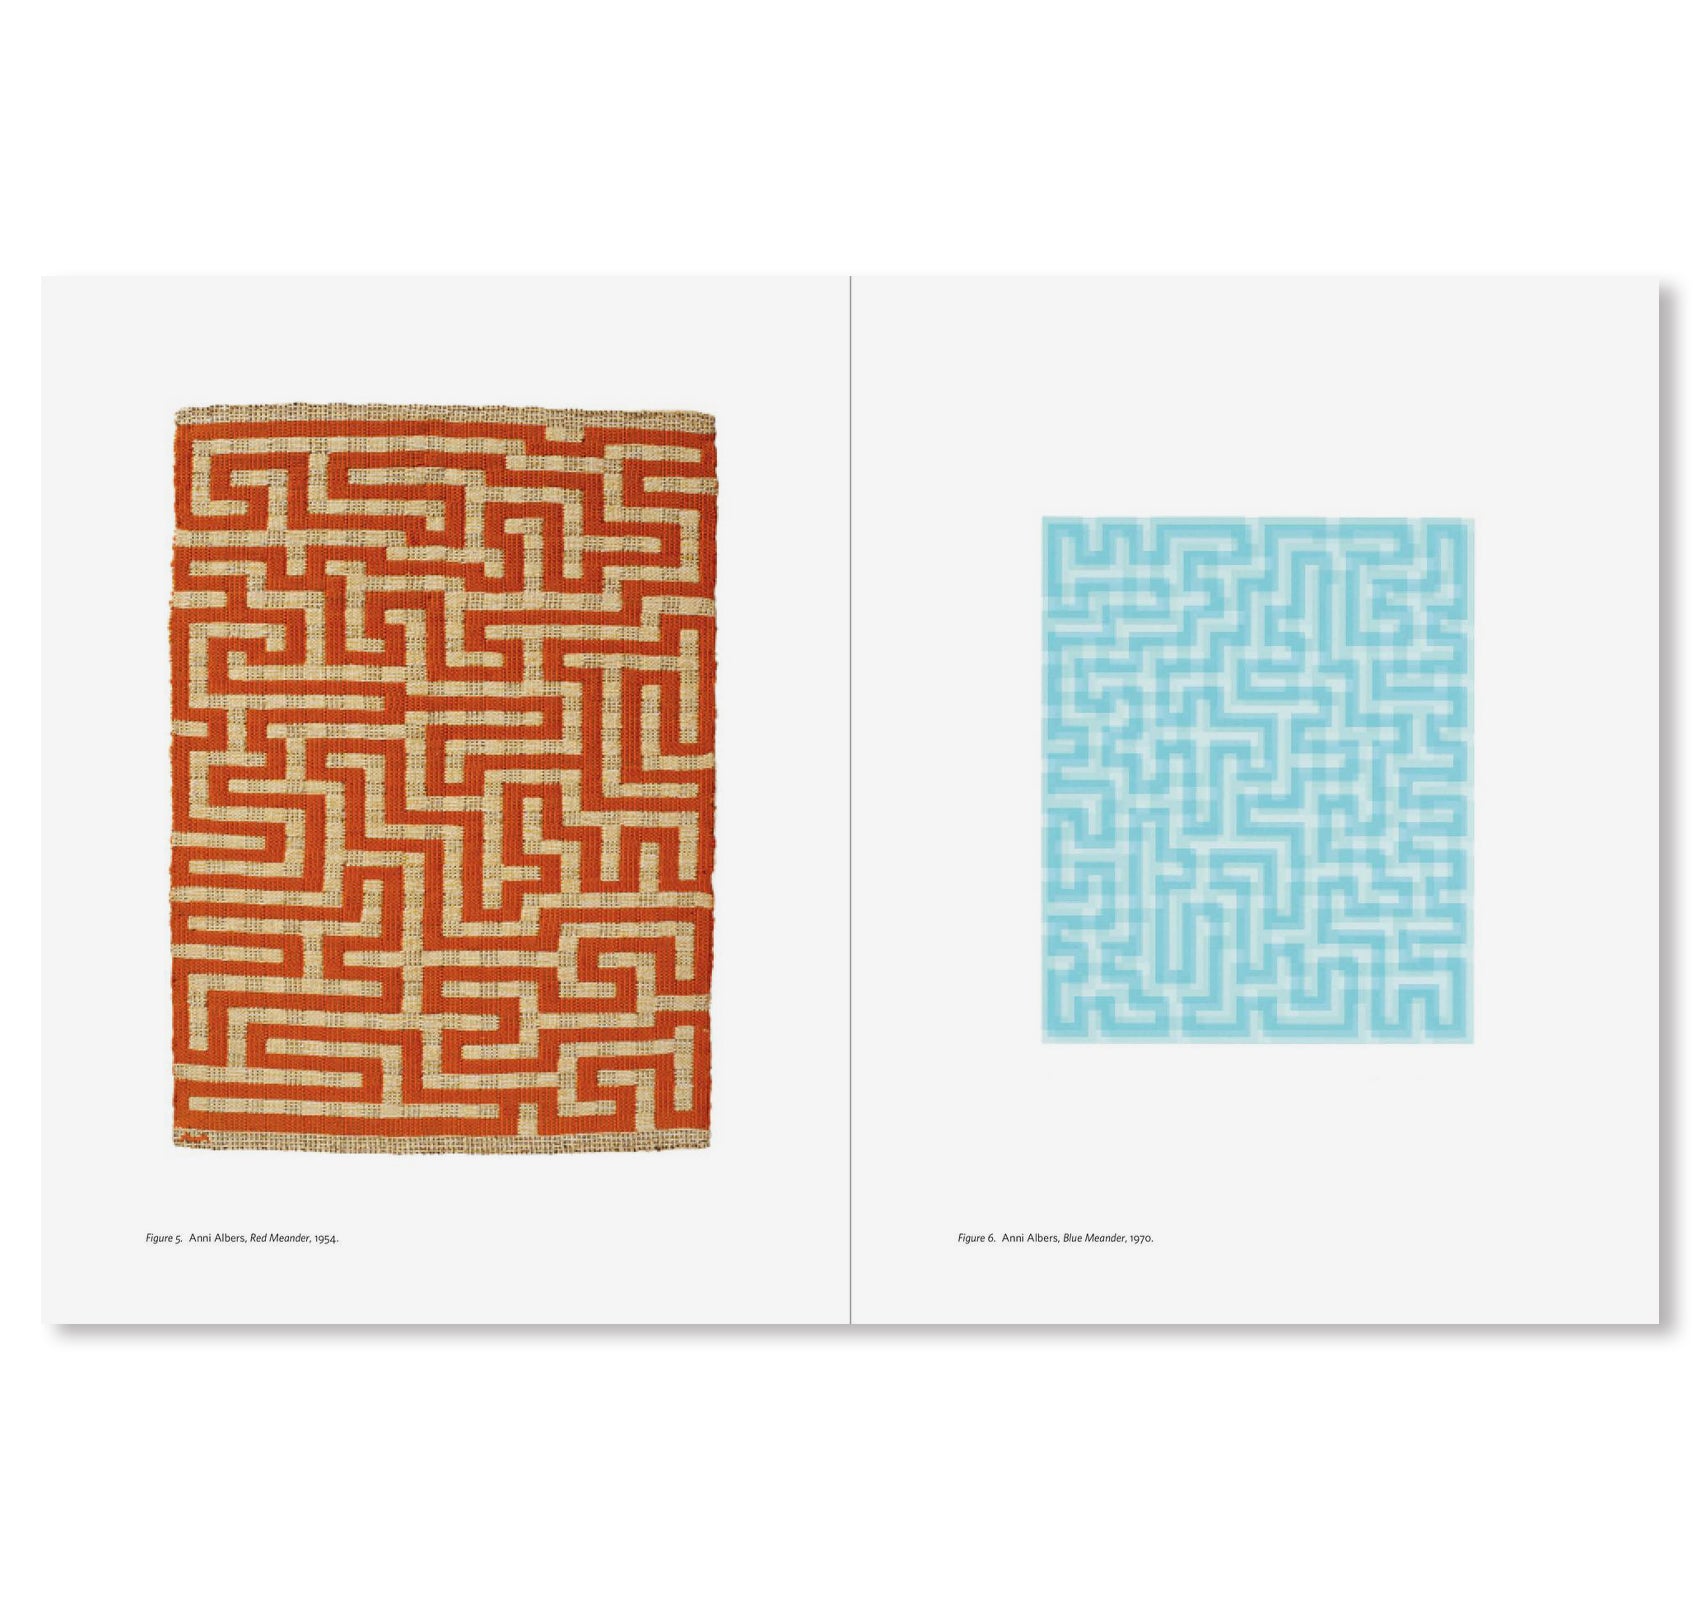 ON WEAVING: NEW EXPANDED EDITION by Anni Albers